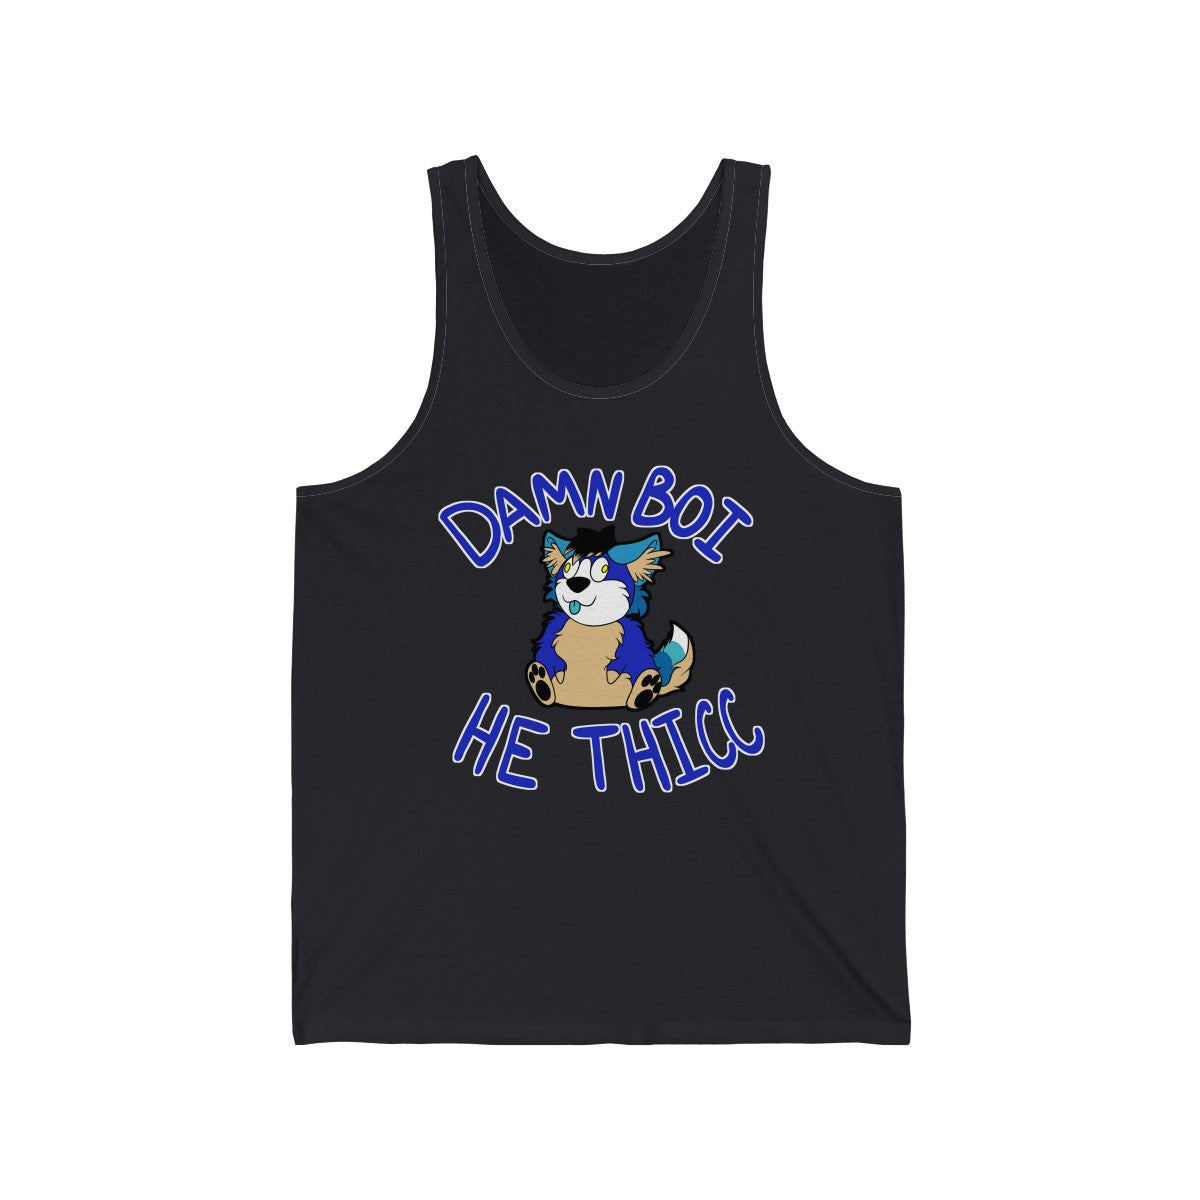 Thicc Boi With Text - Tank Top Tank Top AFLT-Hund The Hound Dark Grey XS 